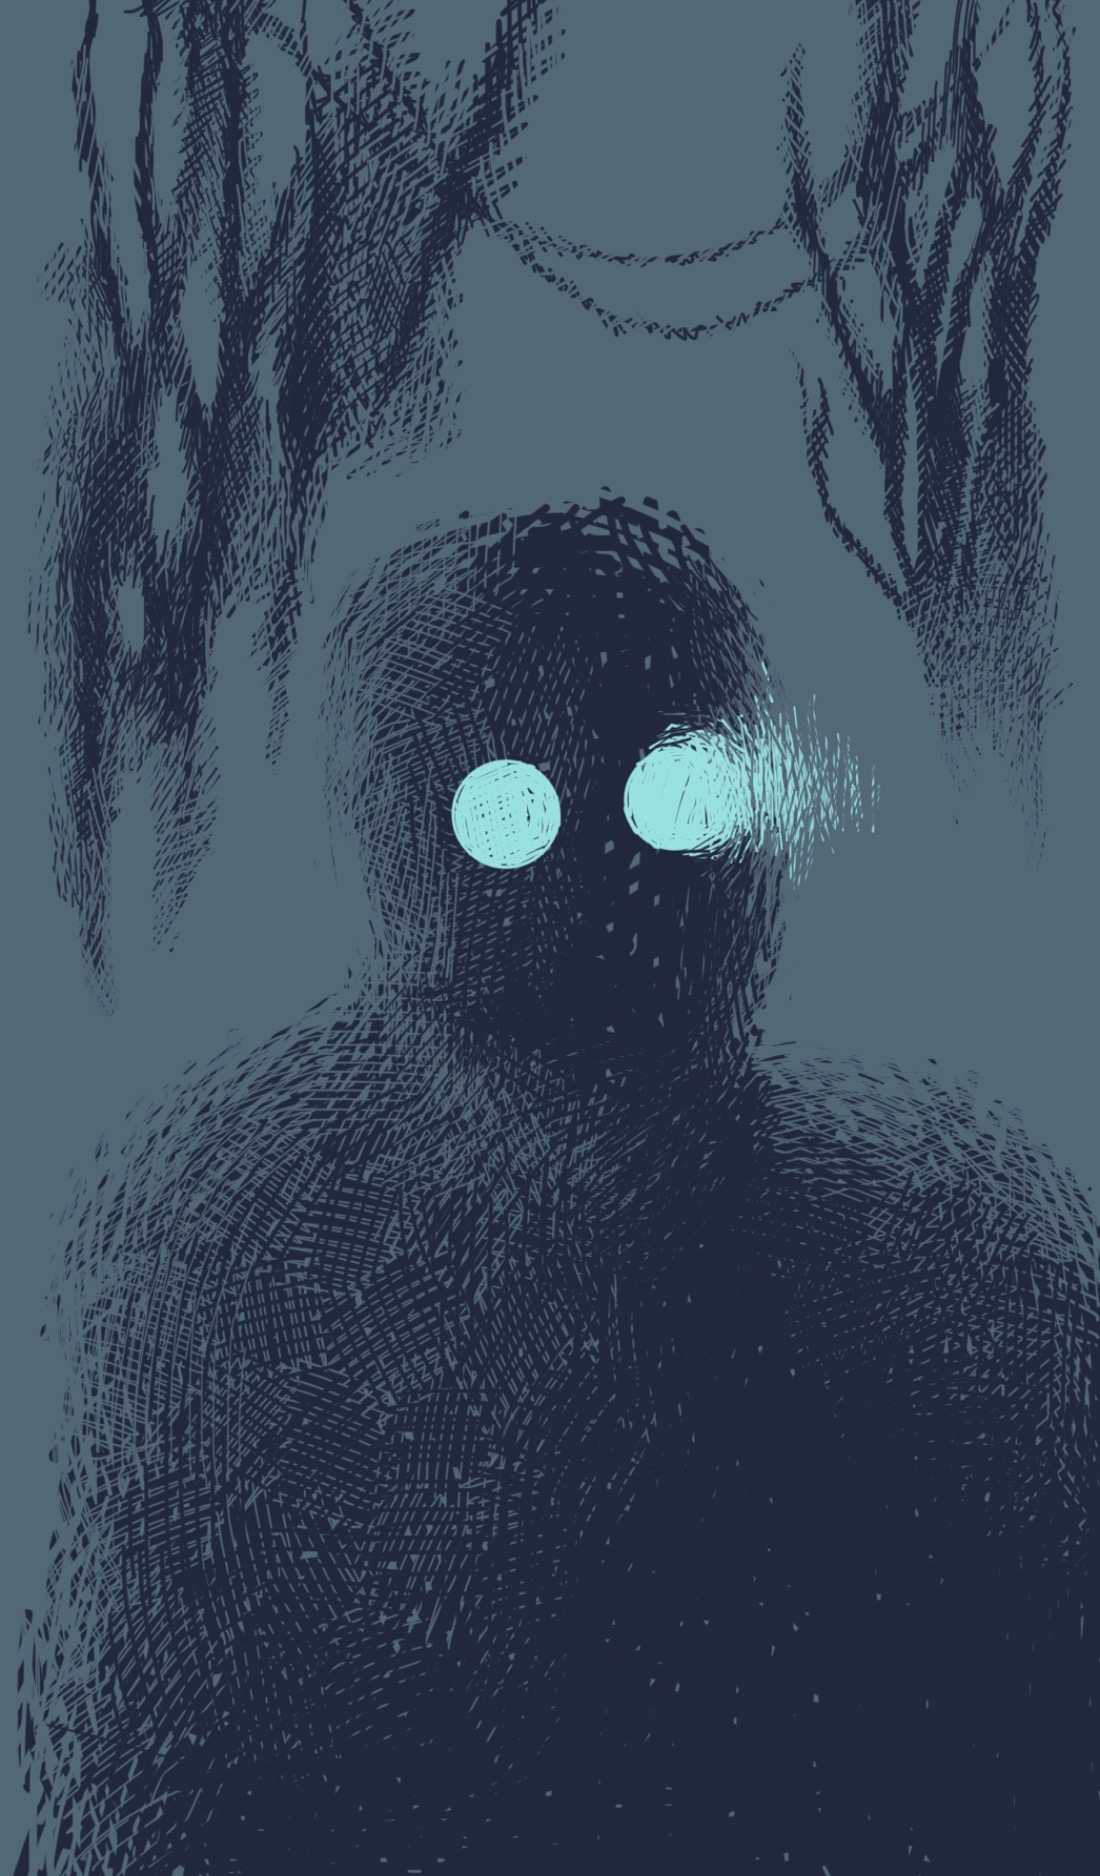 A shadowy figure with circular glowing eyes—possibly glasses—stands in a dim, foggy area. There are suggestions of blurry trees and vines in the background. This is not a nice place, and one is left with the suspicion that this may not be a nice person, either—if it is a person at all.